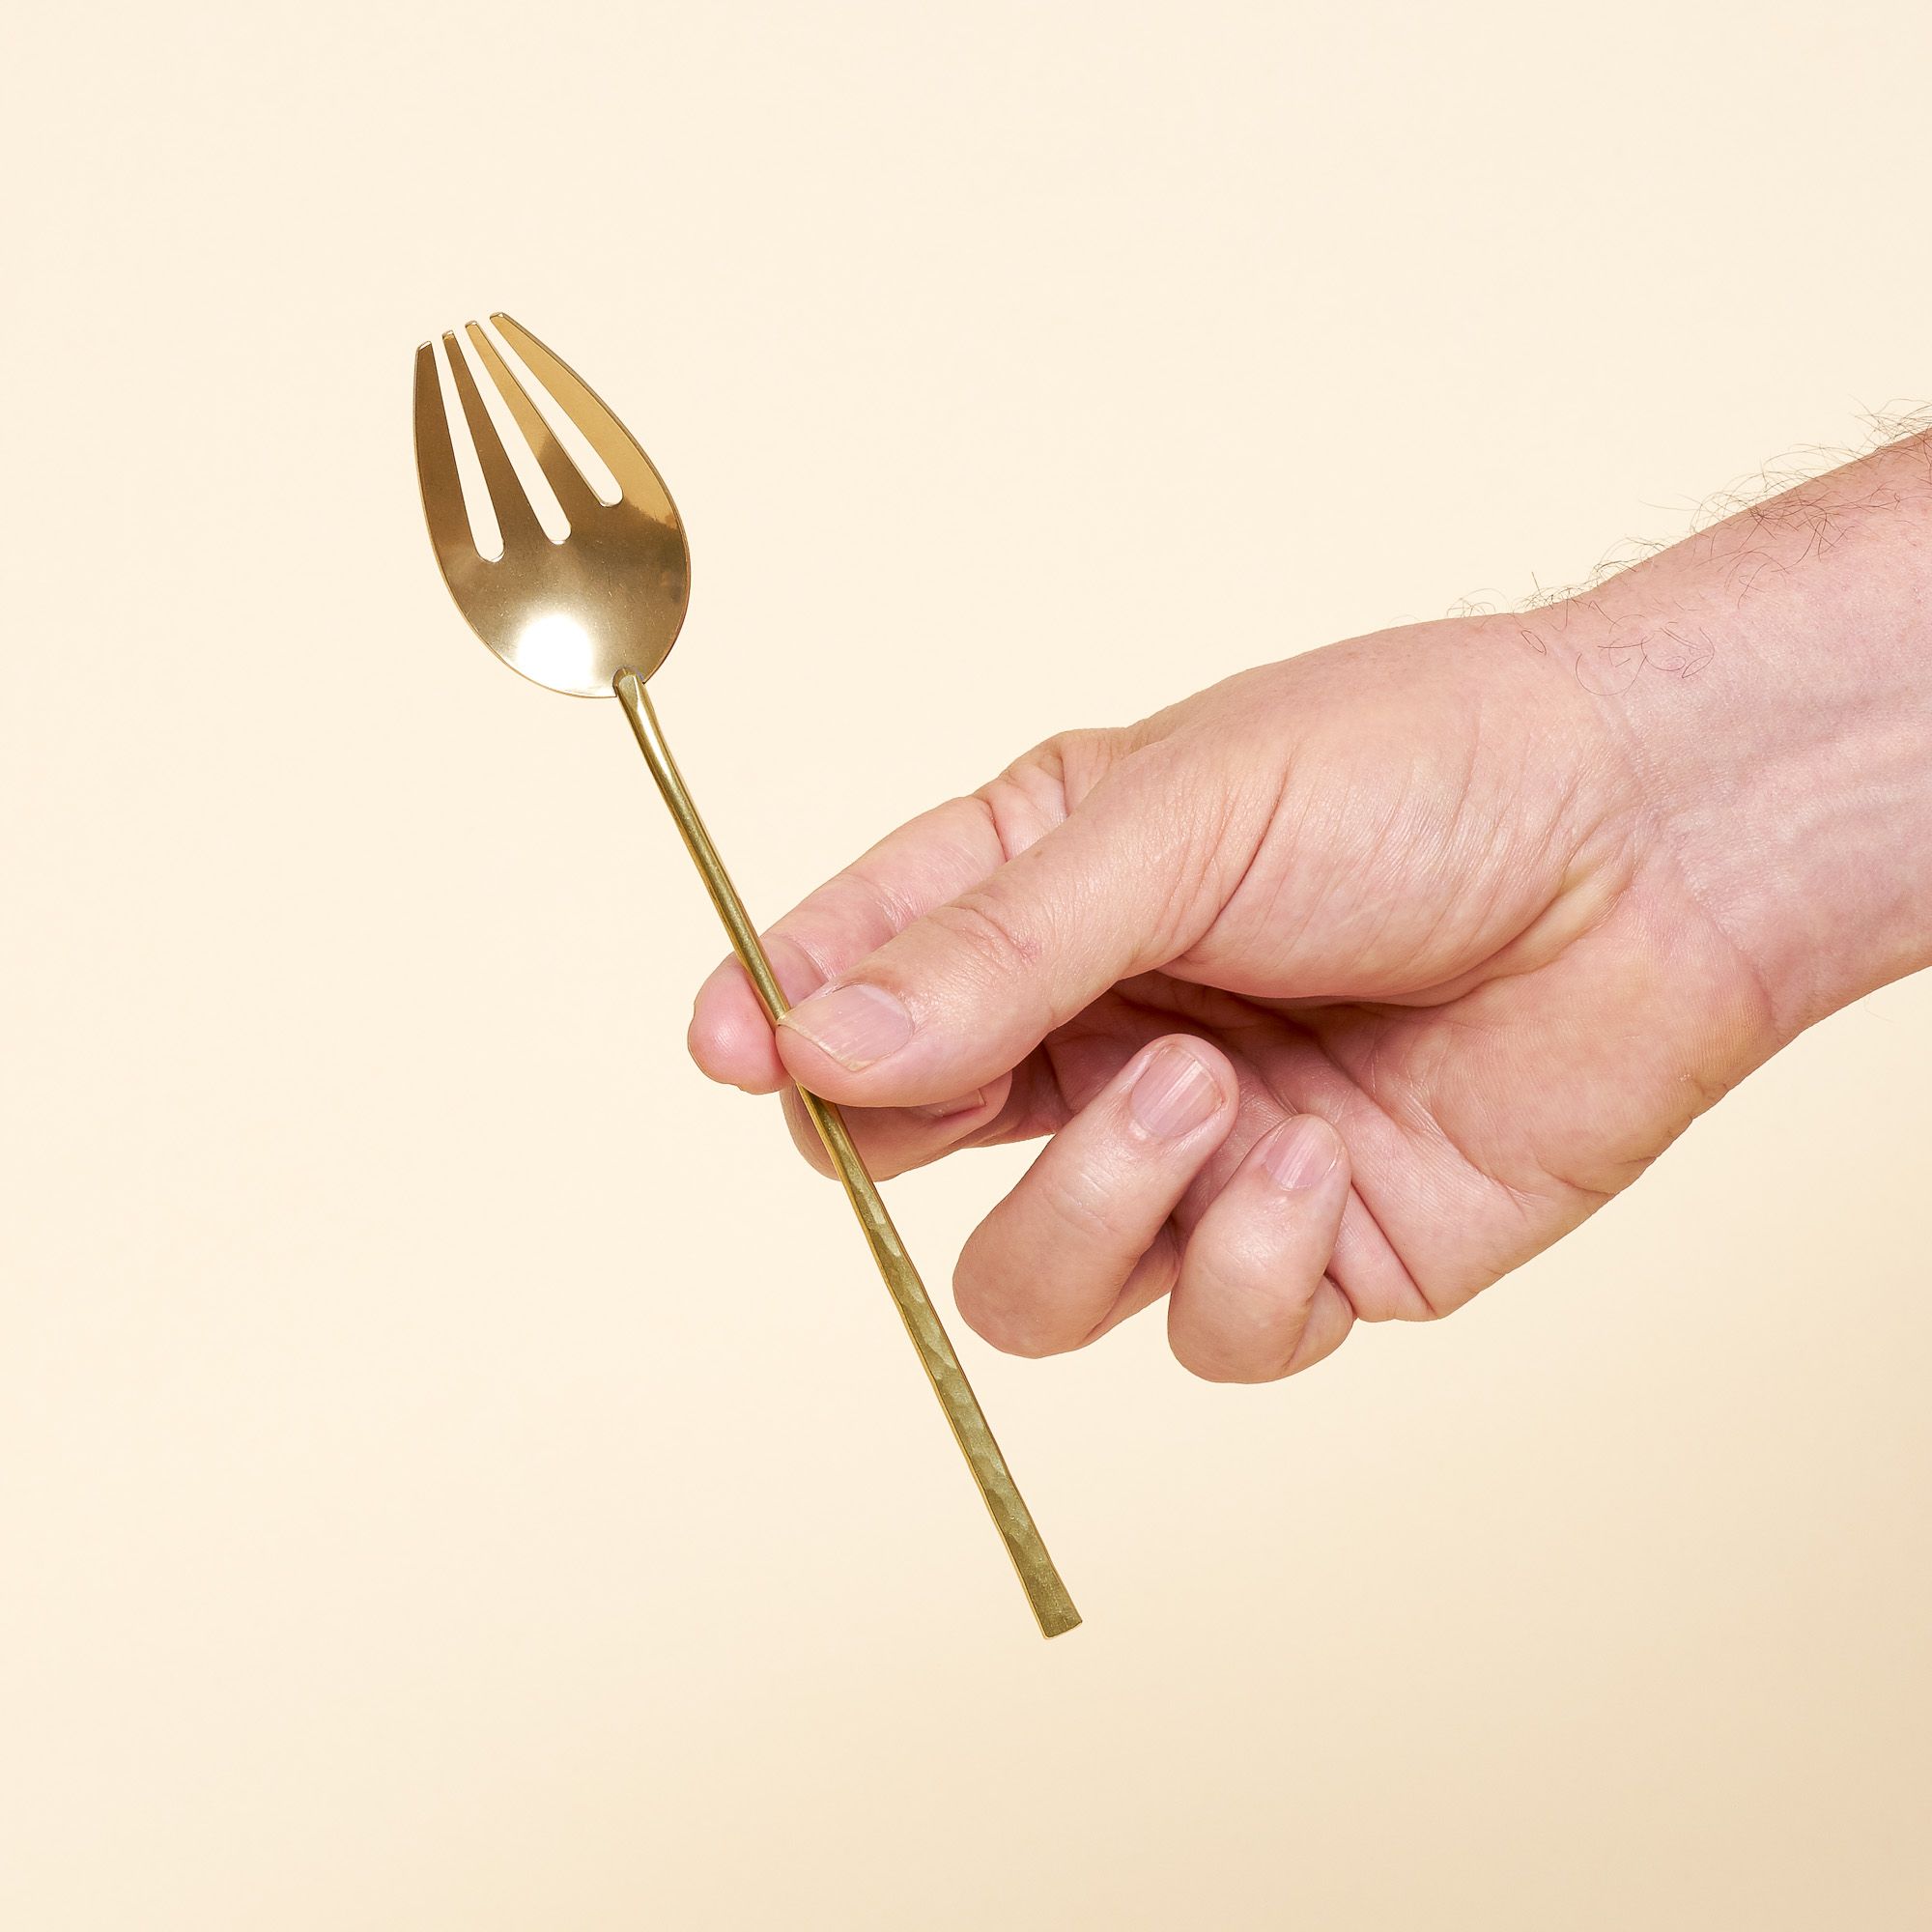 A serving fork with an elongated handle and unique sporky shape.